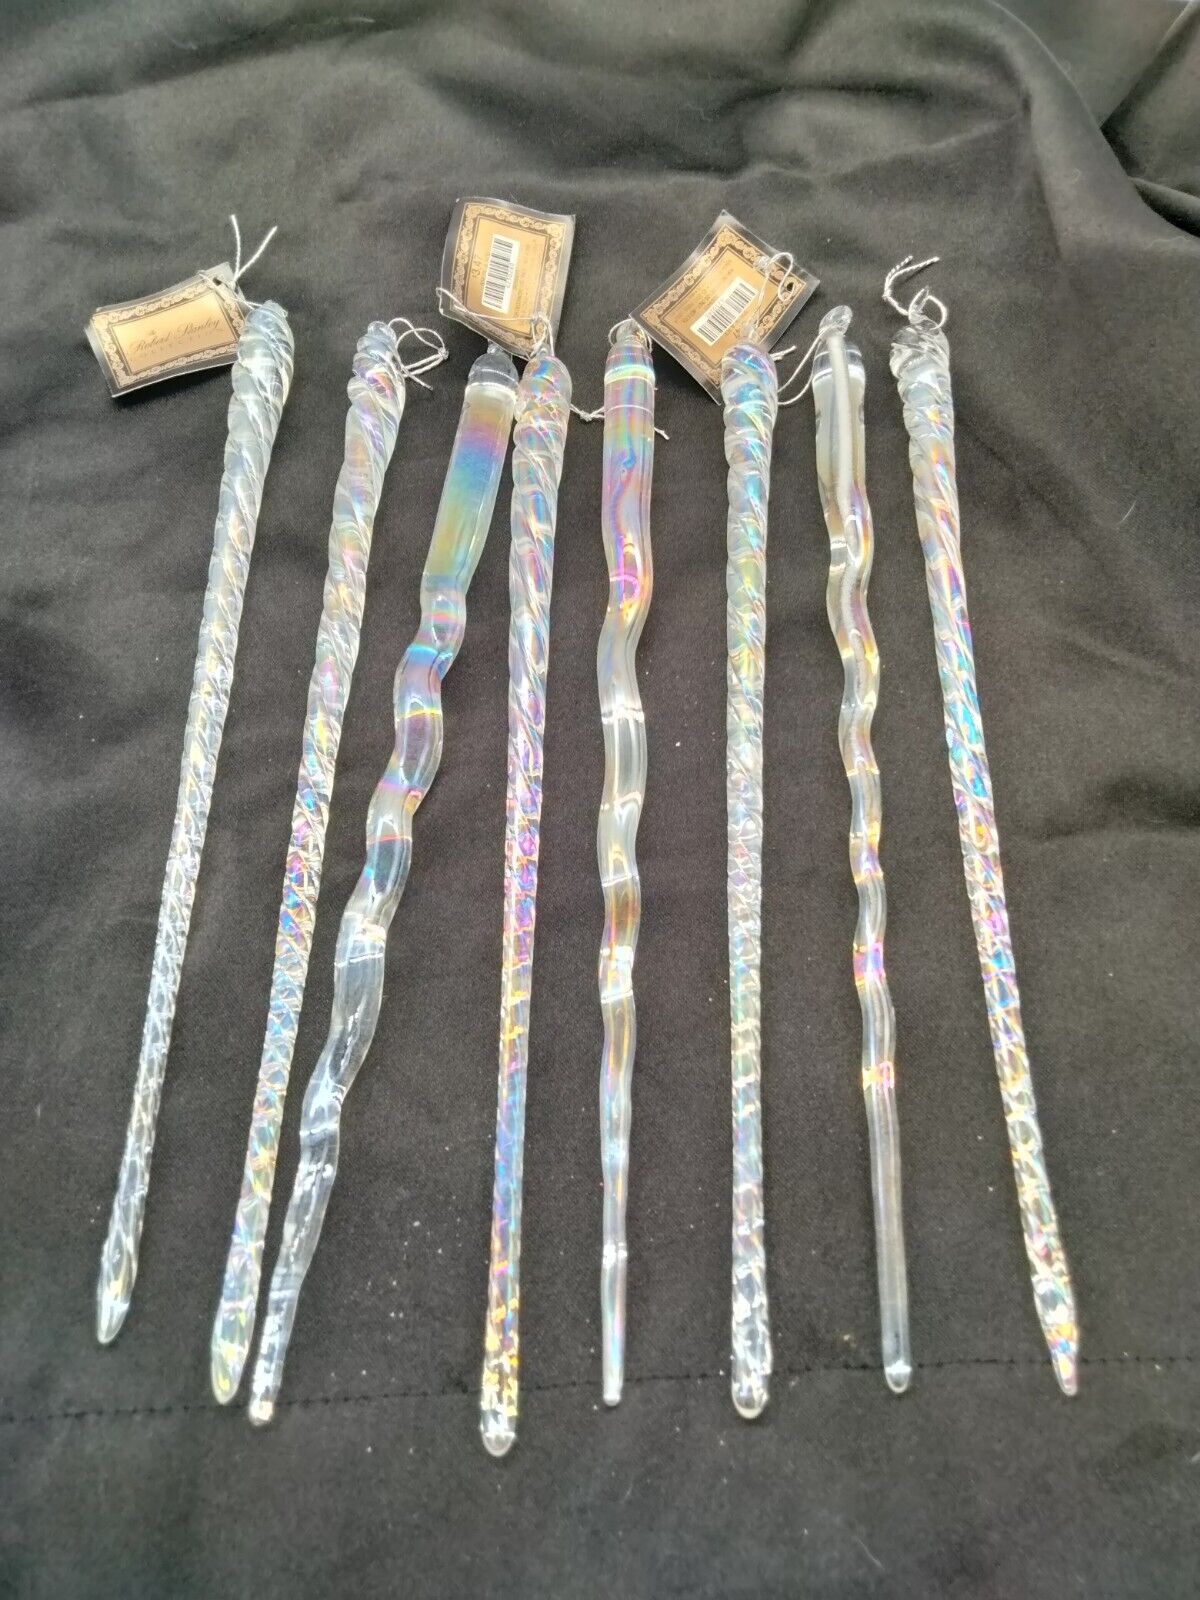 Robert Stanley Blown Glass Icicle Ornaments 11.5 inches Long Each 8 Piece Set